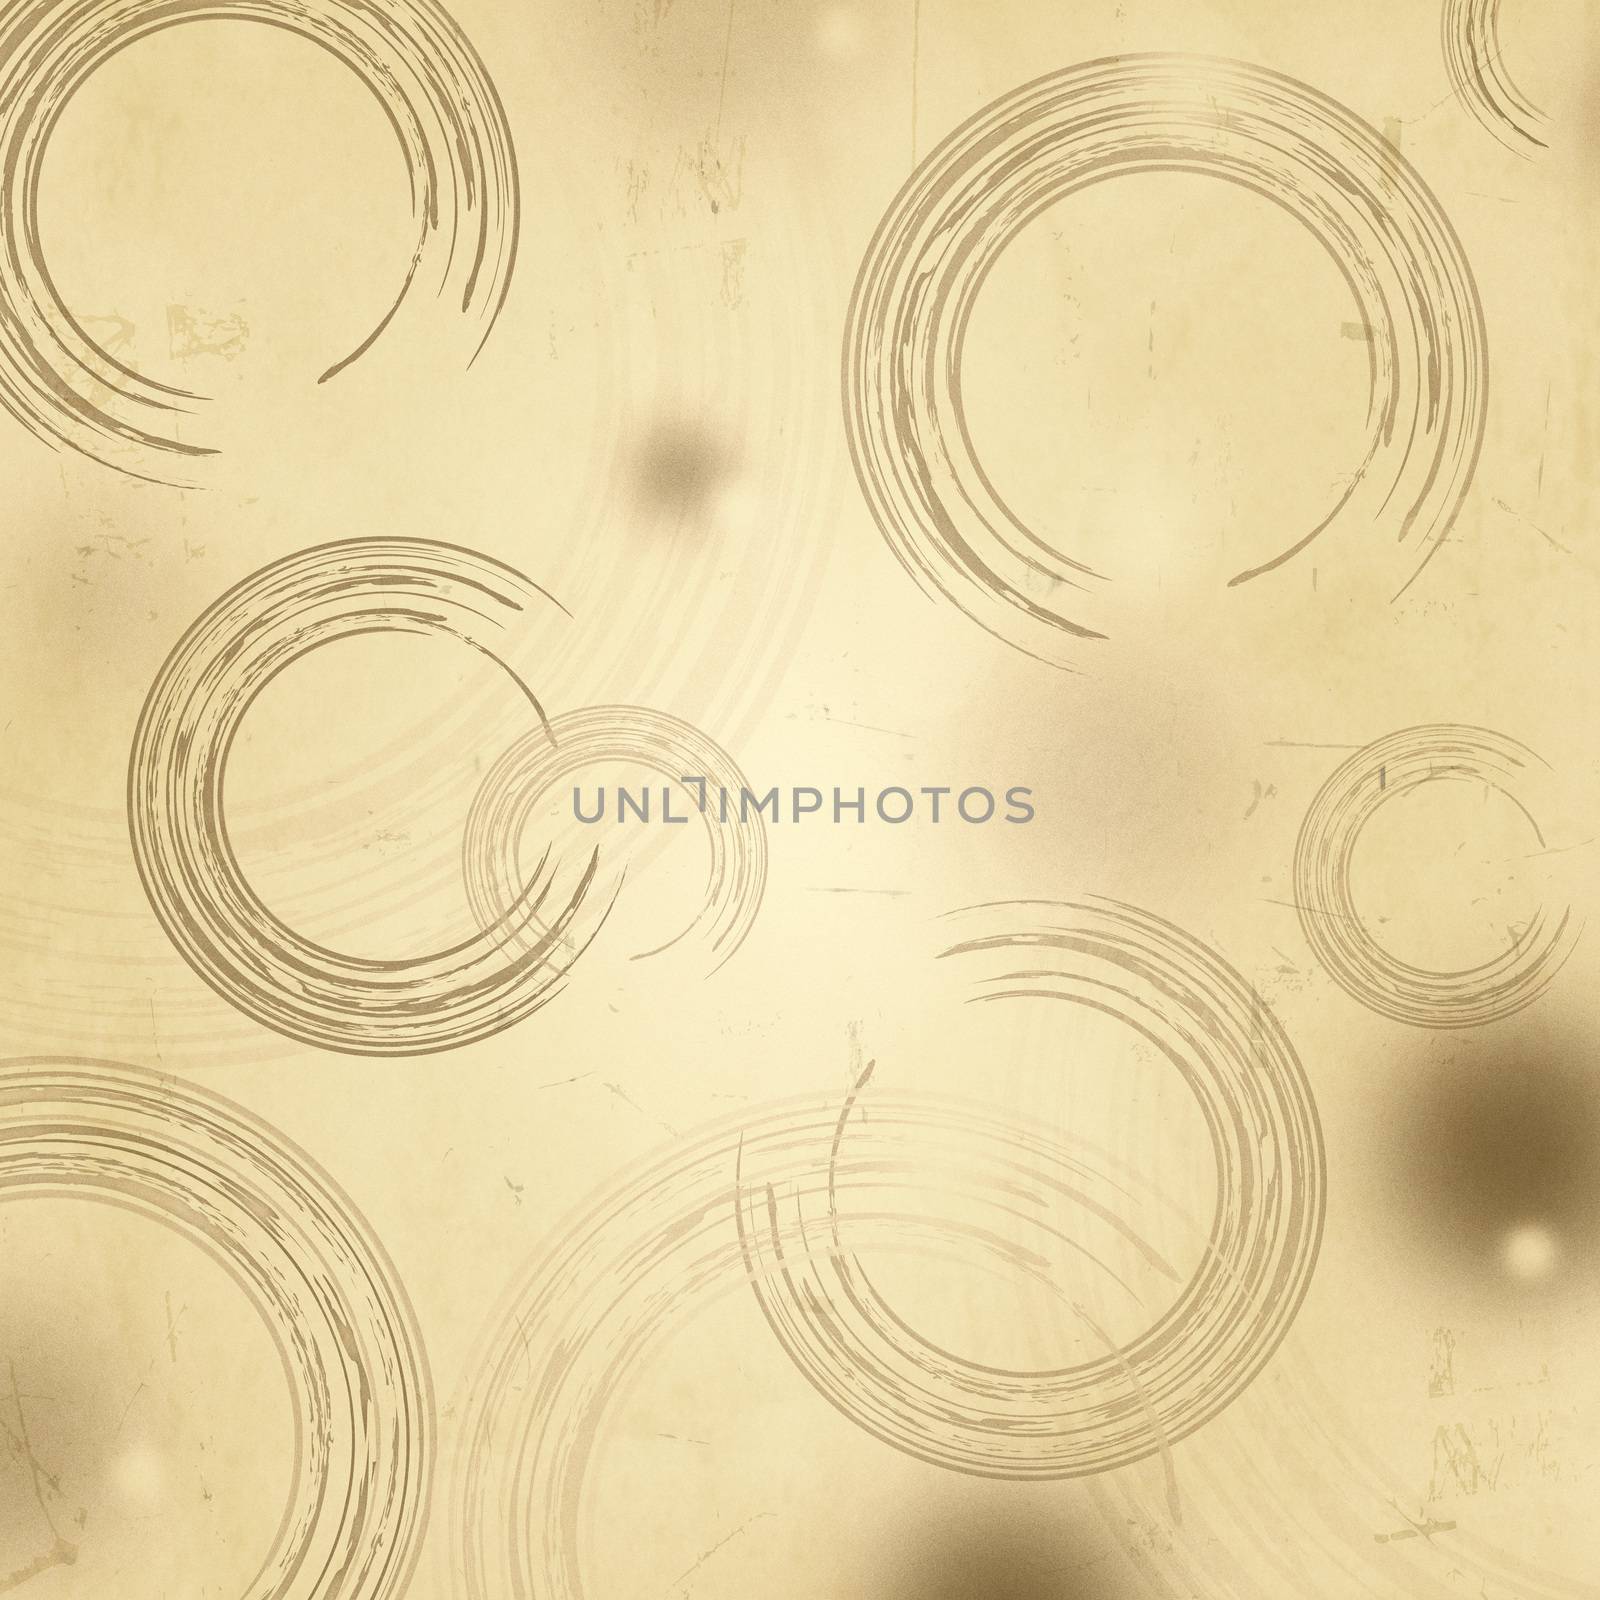 retro background with drawn circles and dots